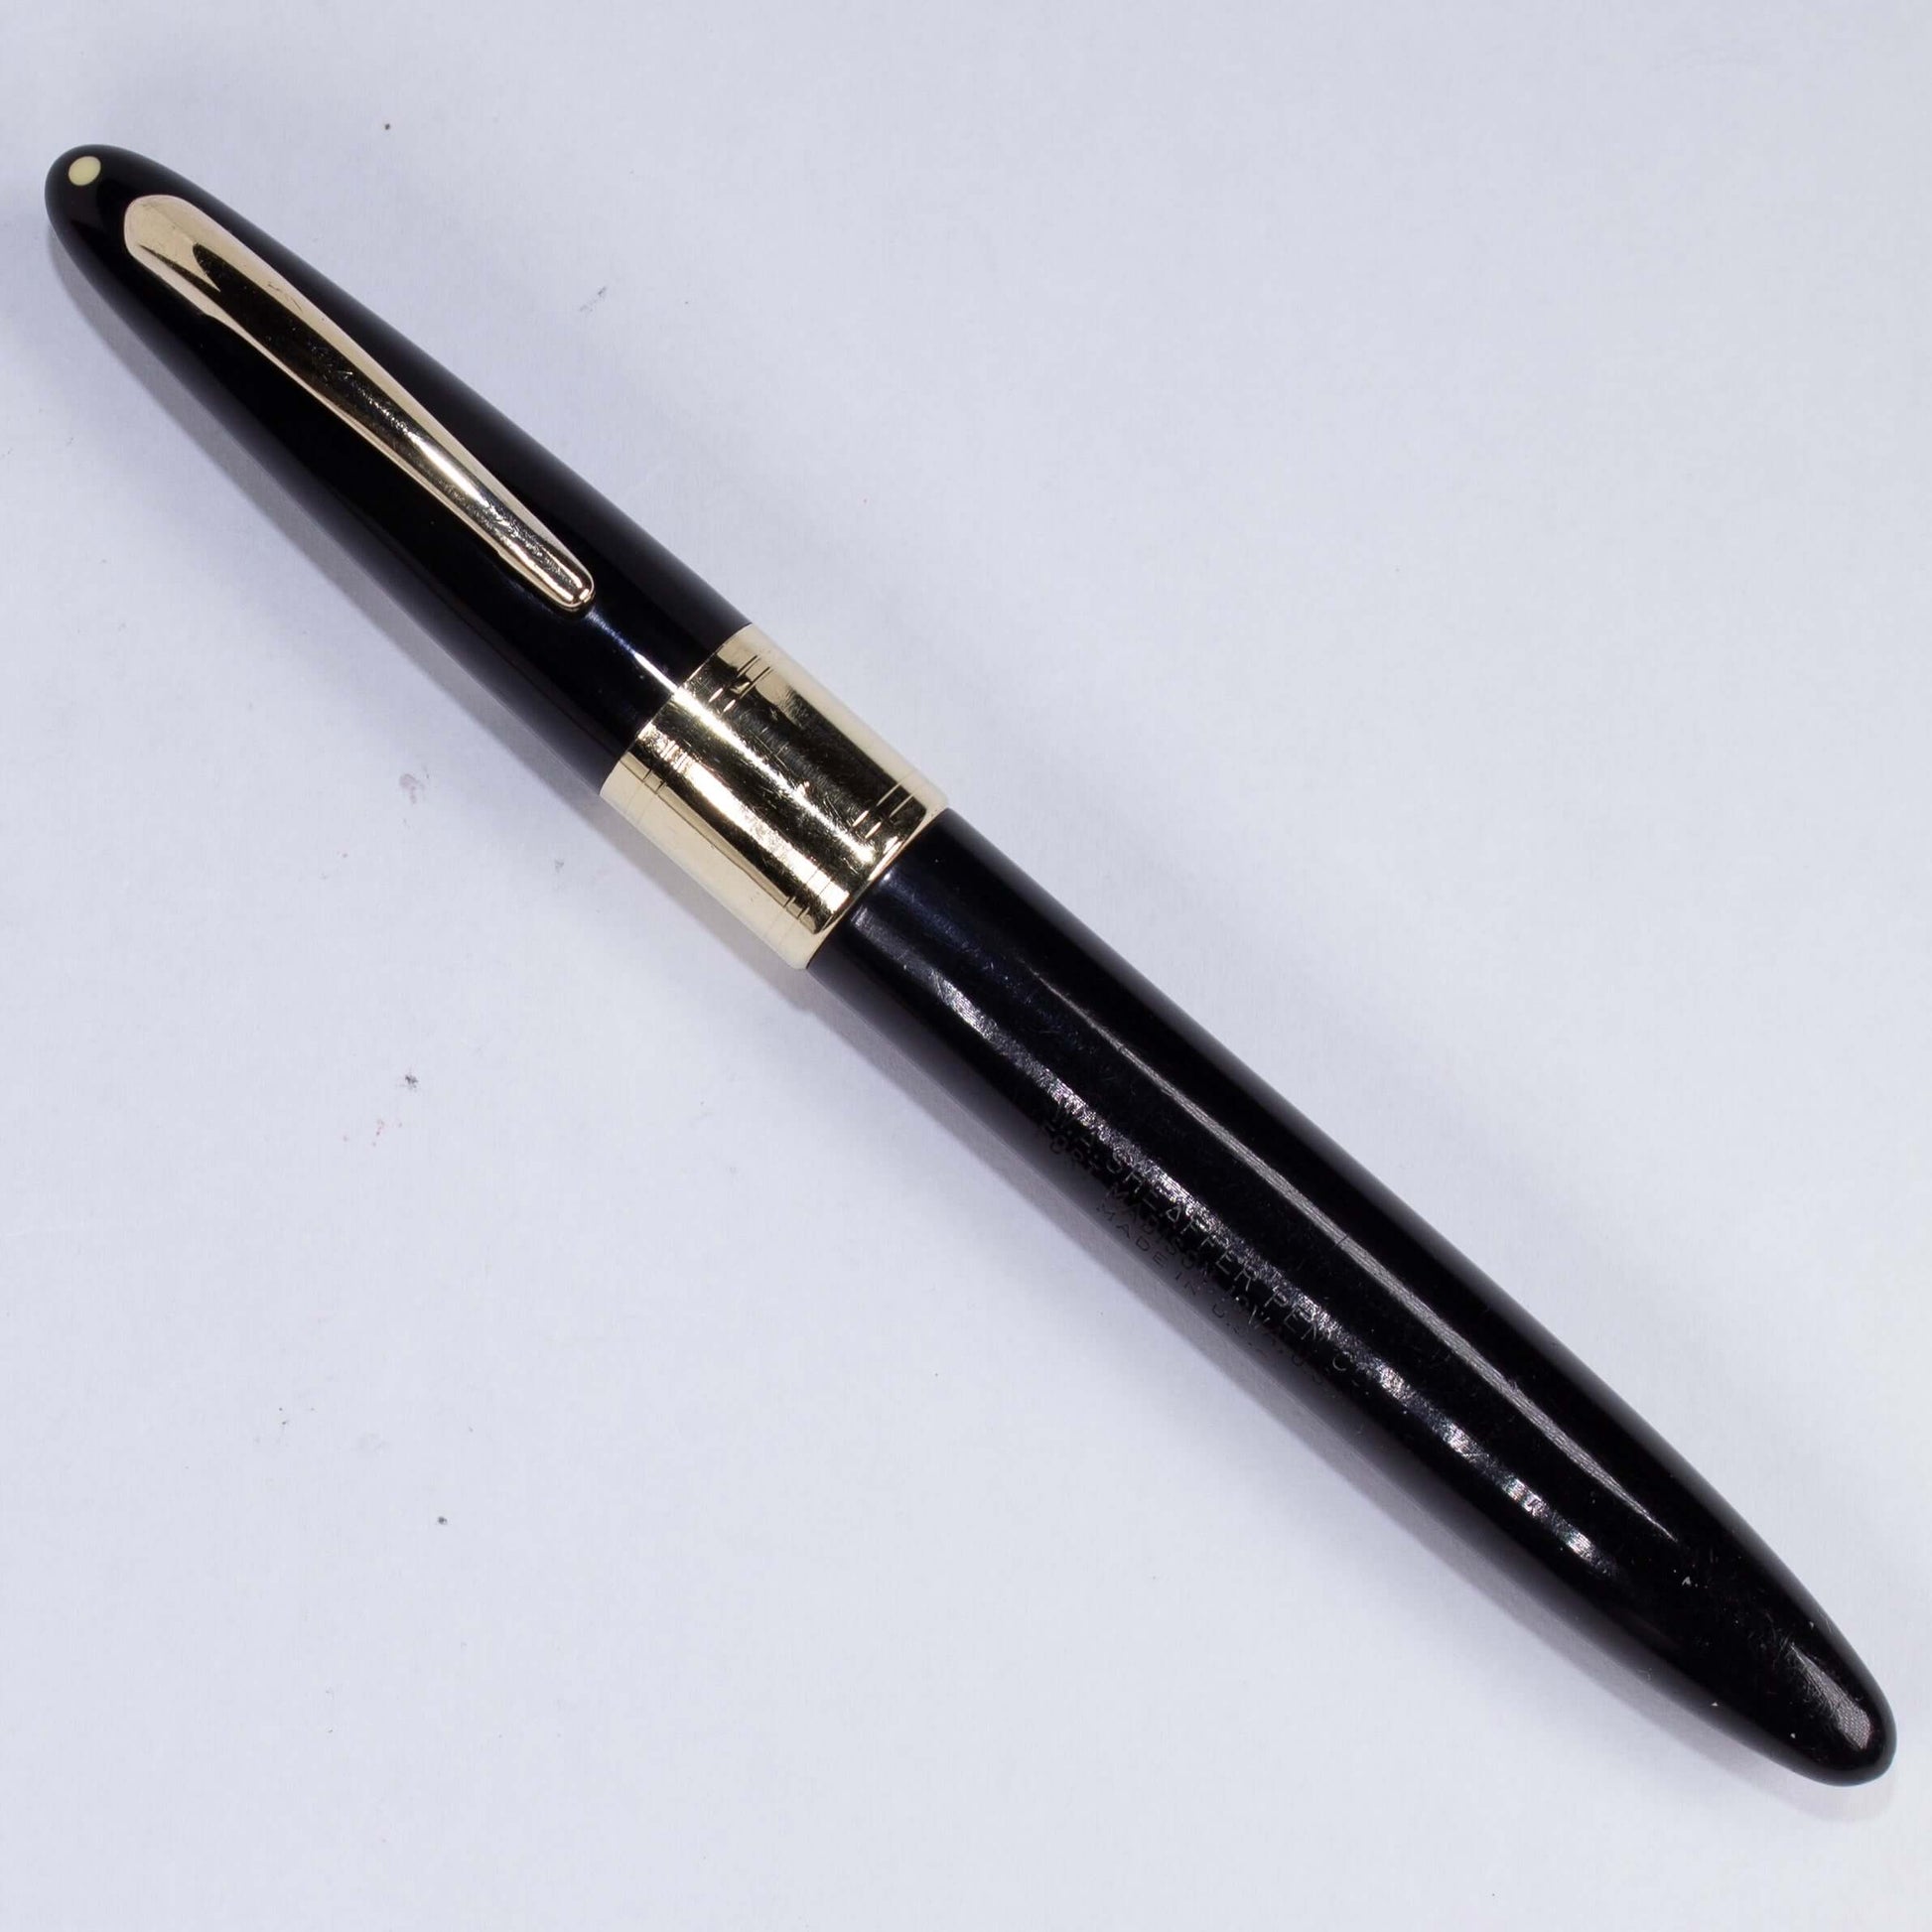 ${titleName/Type: Restored Vintage Fountain Pen Manufacture Year: 1940s Length: 5 1/4 Filling System: Lever filler with new sac Color/Pattern: Black Nib Type/Condition and remarks: Large Two-toned wraparound Triumph 14K fine nib Condition: ﻿This large She